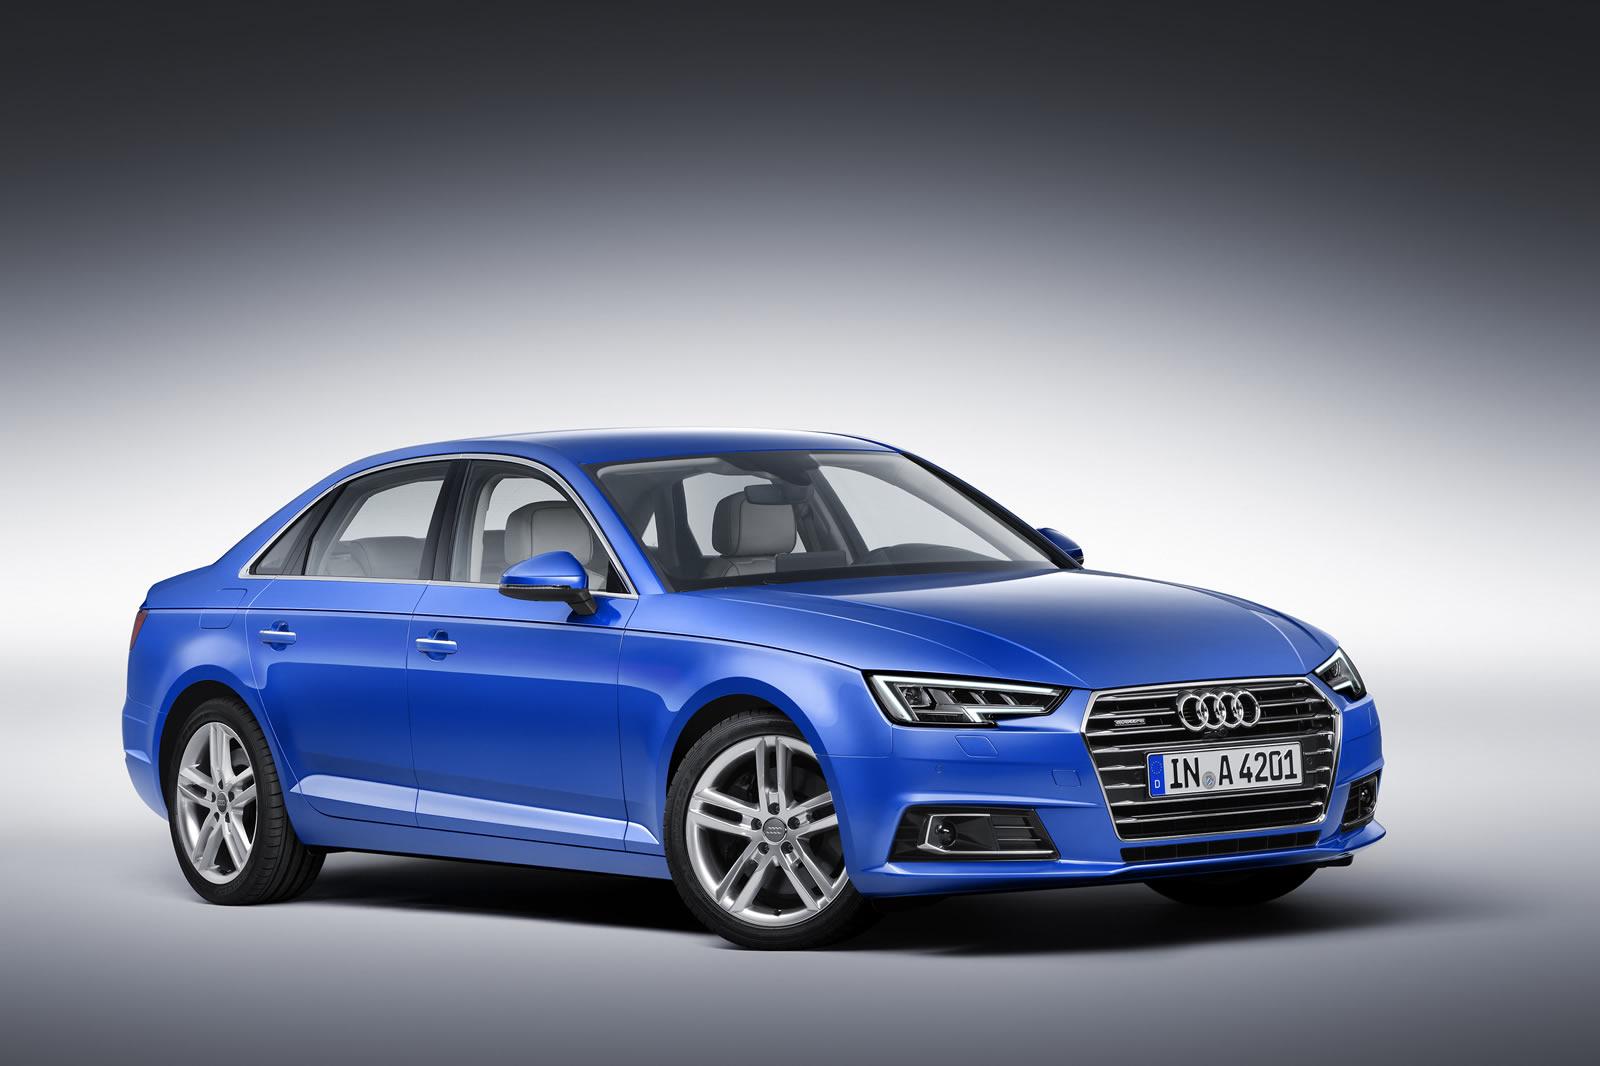 Audi introduces A4 diesel launched at ₹40.20 lakh